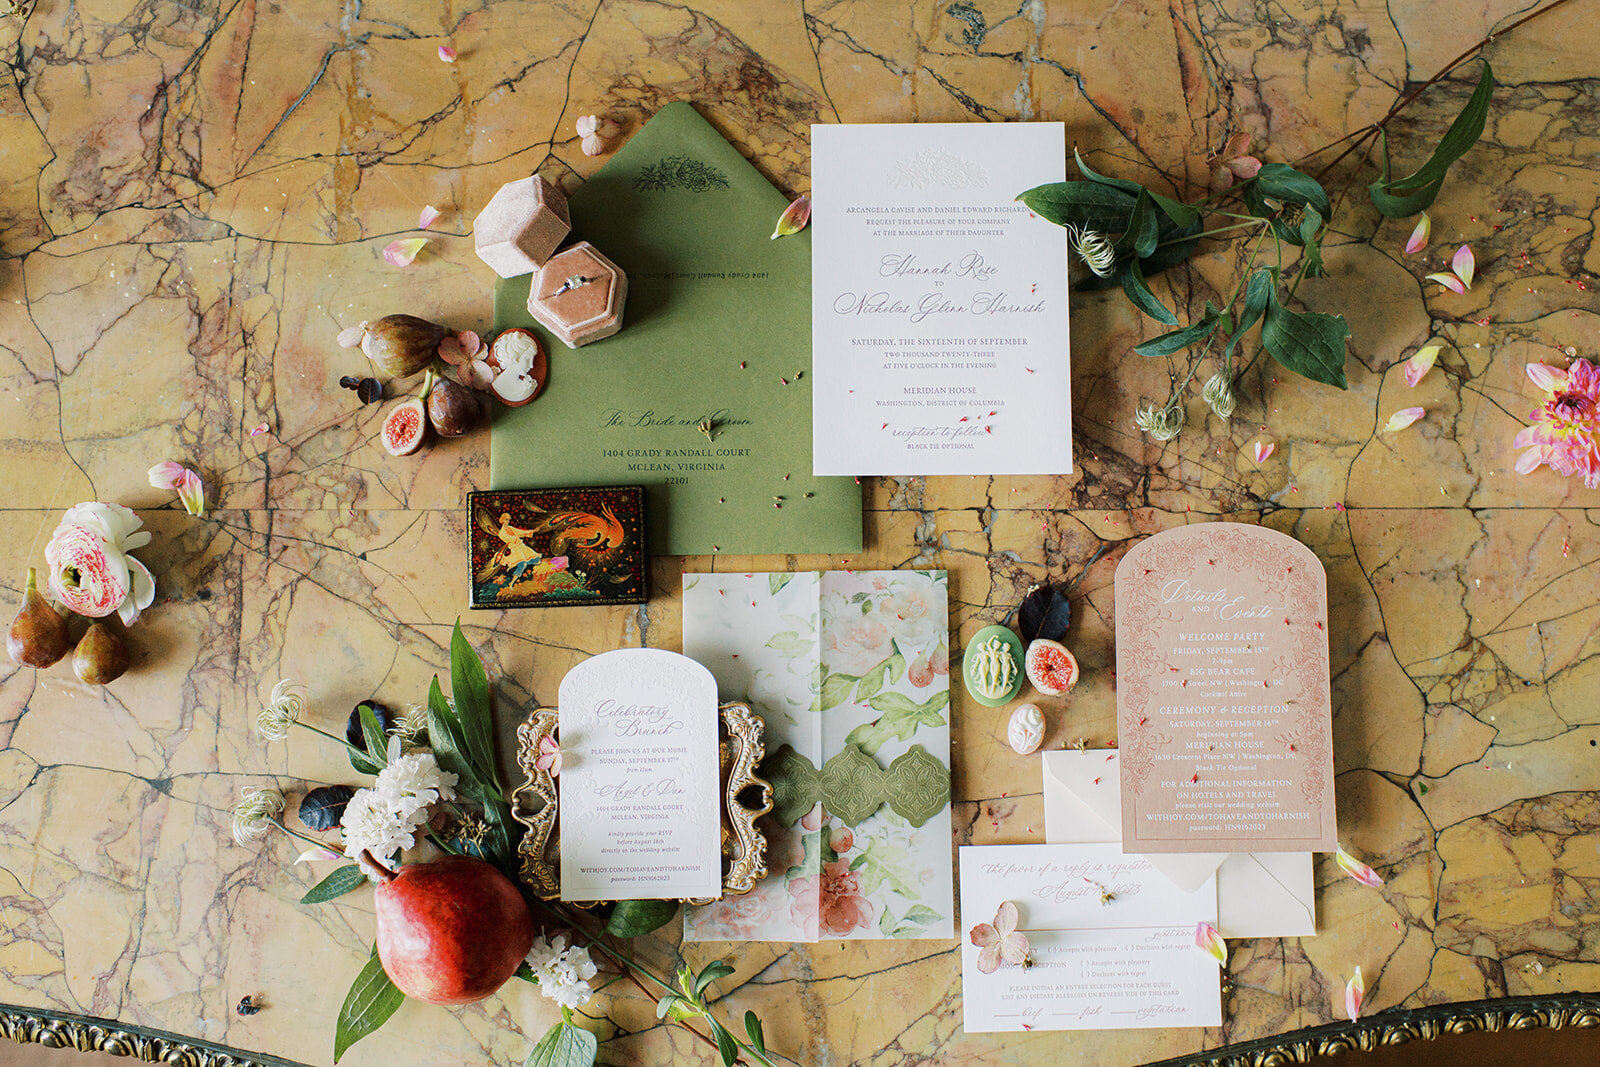 Wedding details photo of invitation, rings and florals